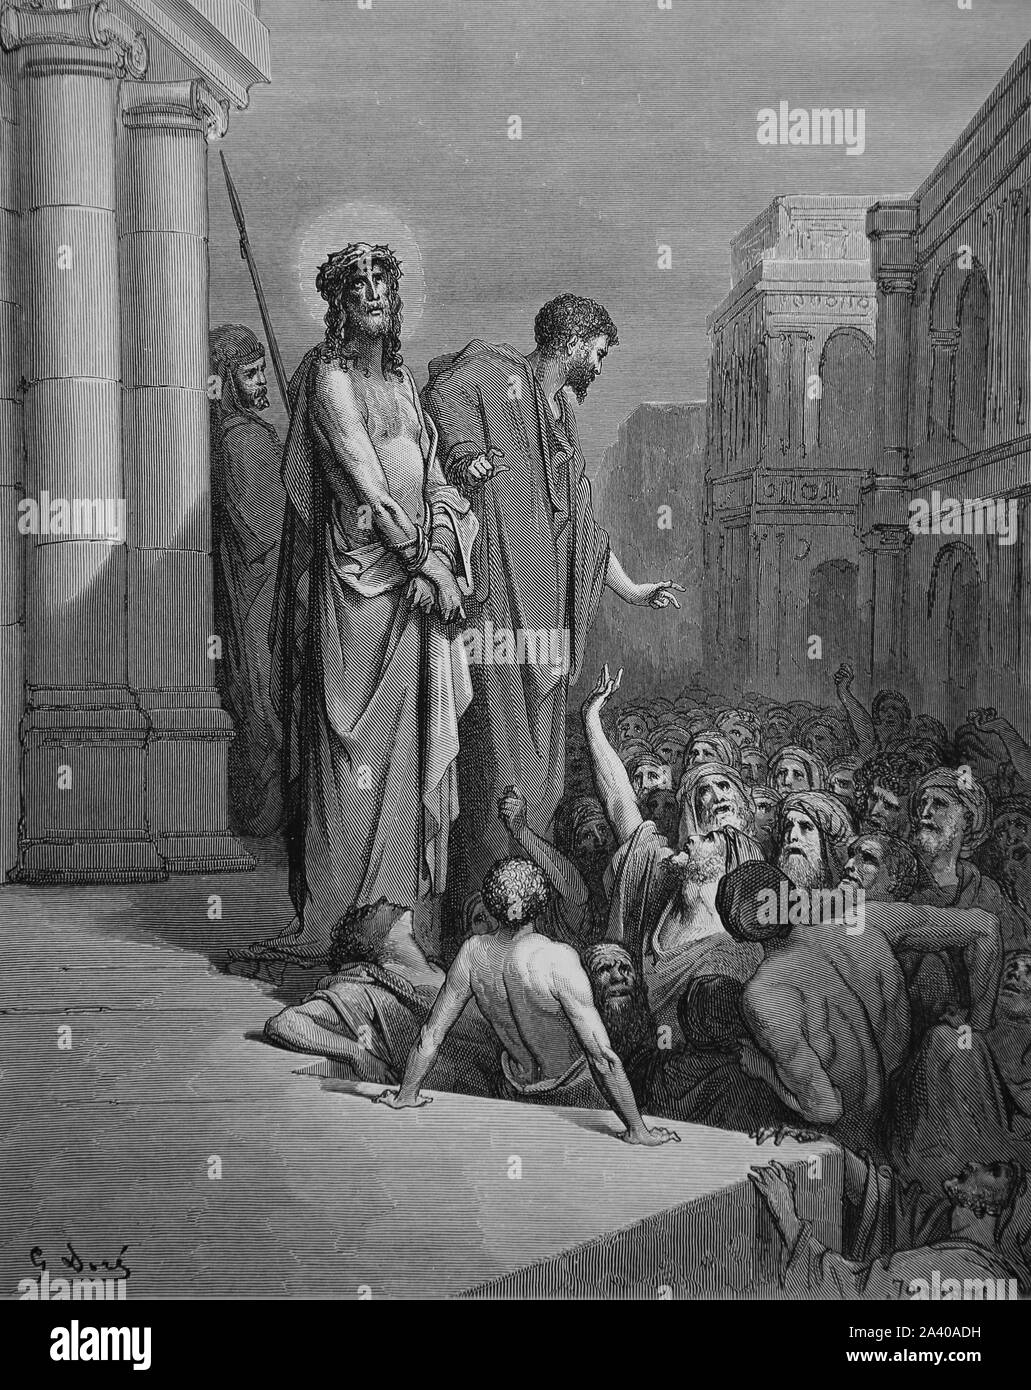 The Passion of Jesus. Christ presented to the people (John 19:15). Engraving. Bible Illustration by Gustave Dore. 19th century. Stock Photo